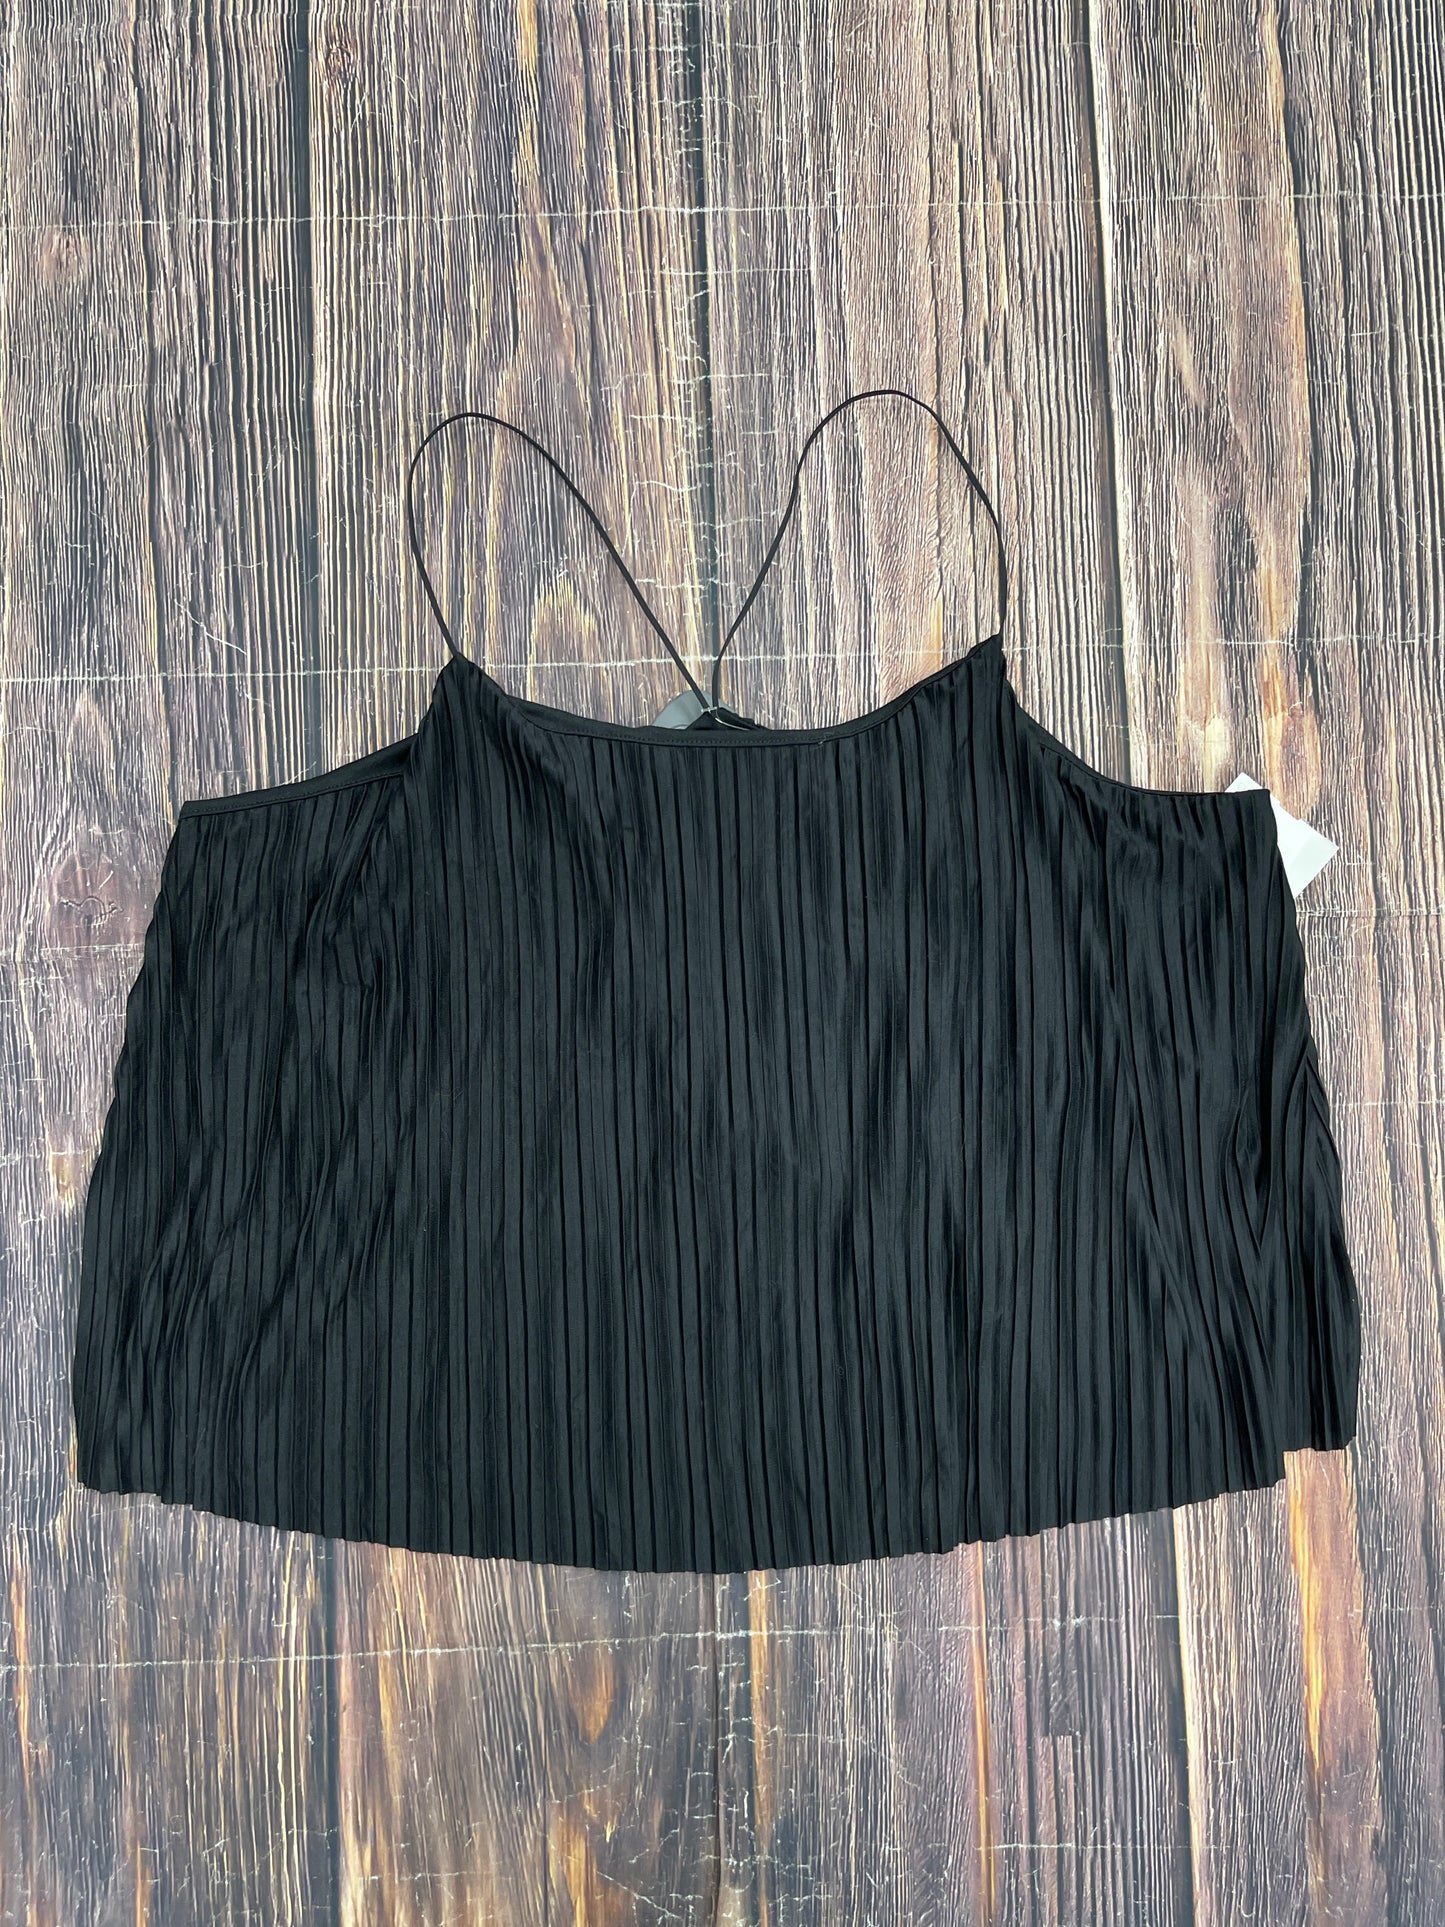 Black Tank Top A New Day, Size 1x